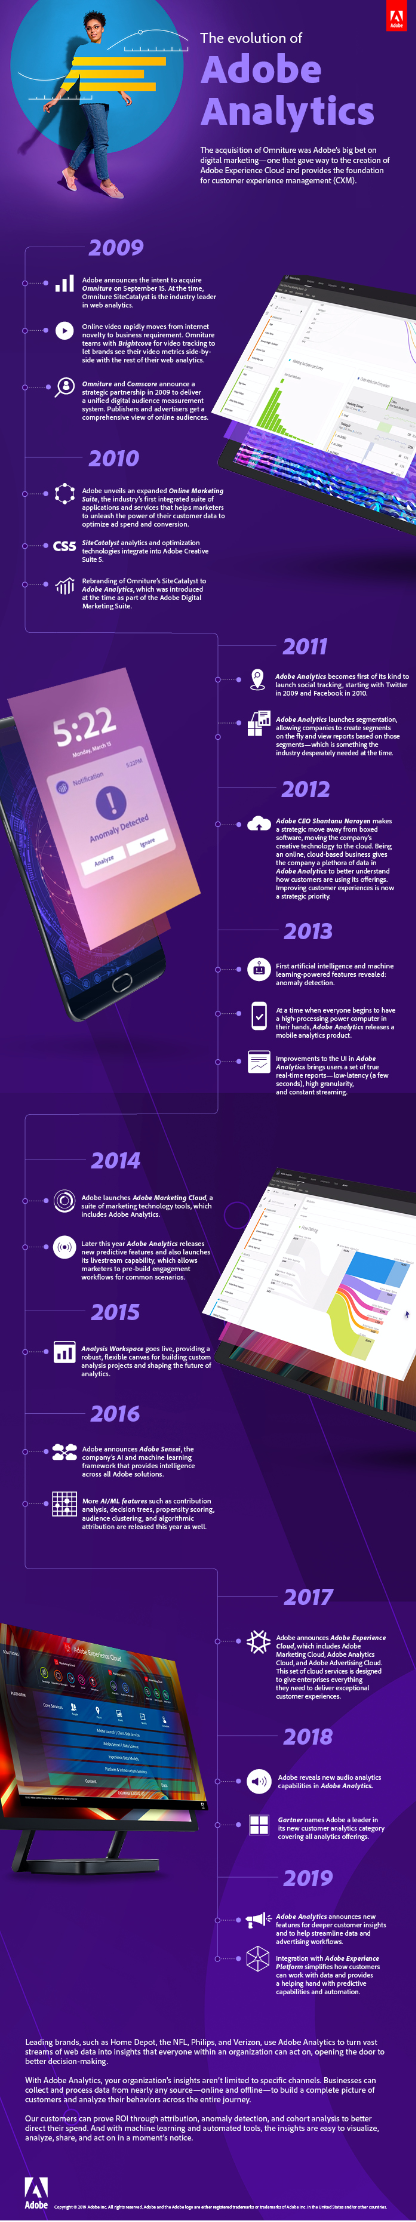 Full infographic highlighting the evolution of Adobe Analytics using designed timeline with iconography and pulled screen shots representing features